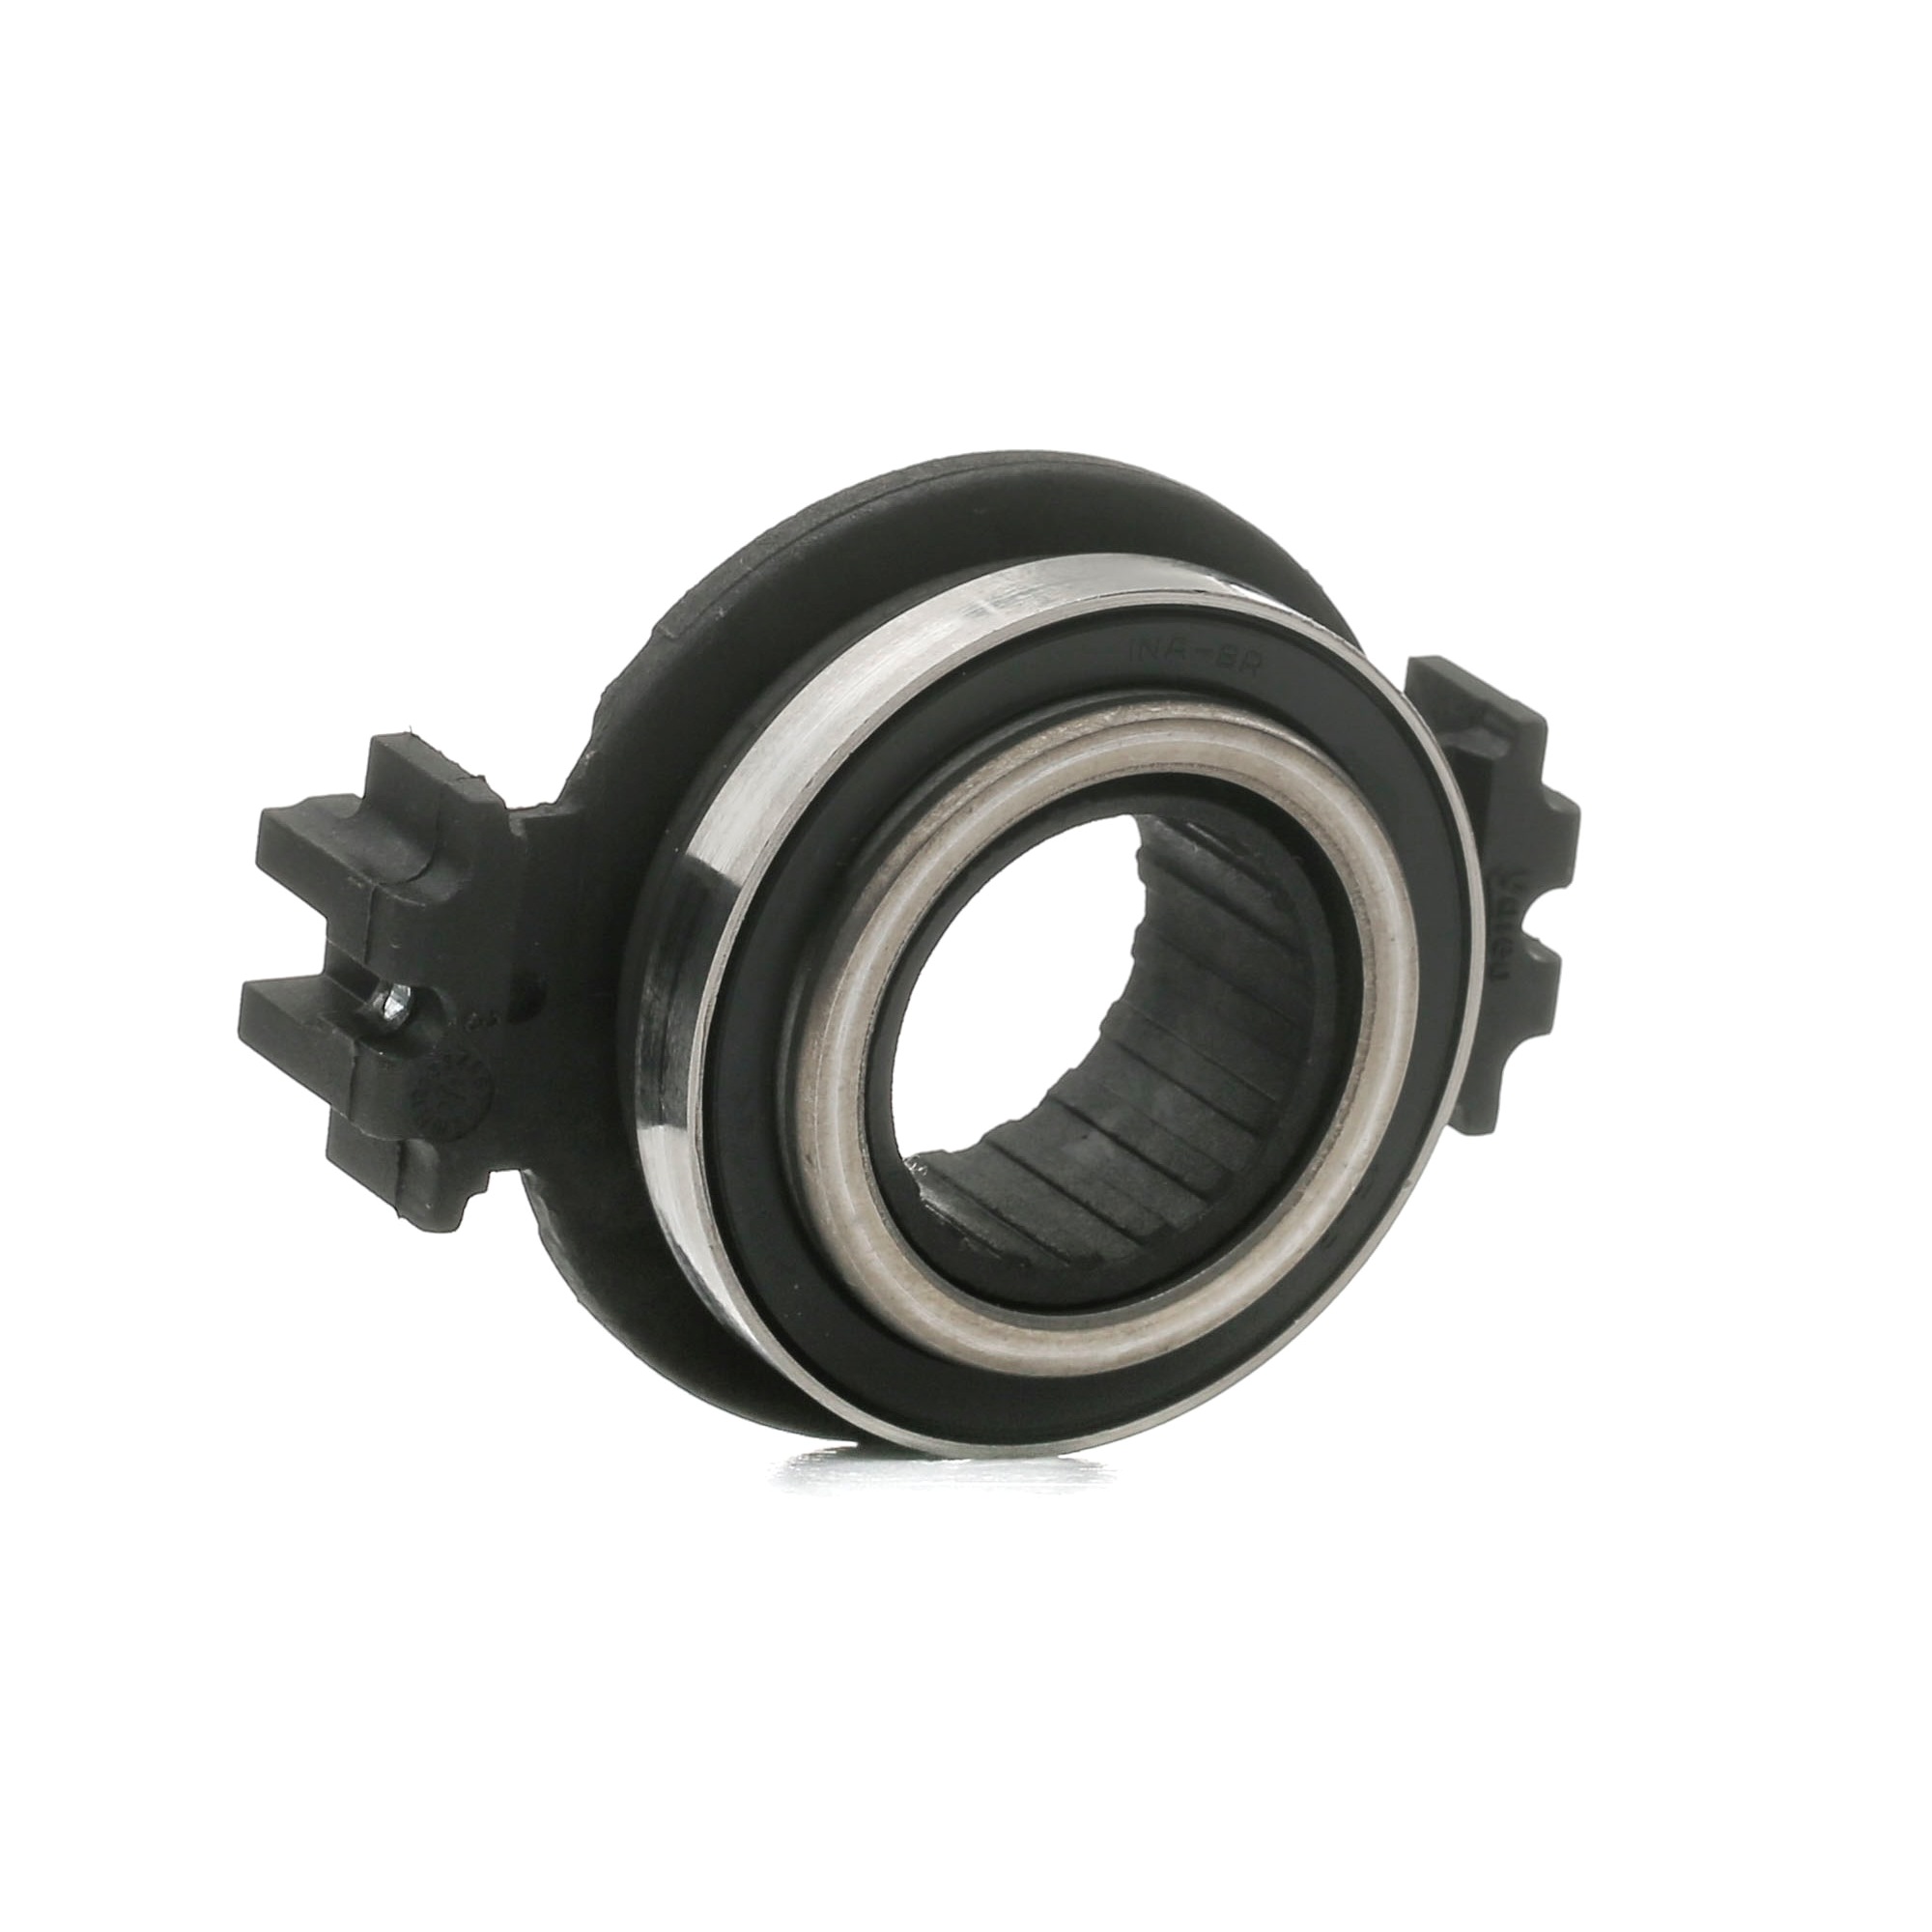 Image of VALEO Clutch Release Bearing PEUGEOT,CITROËN 804036 204150,204161,204150 Clutch Bearing,Release Bearing,Releaser